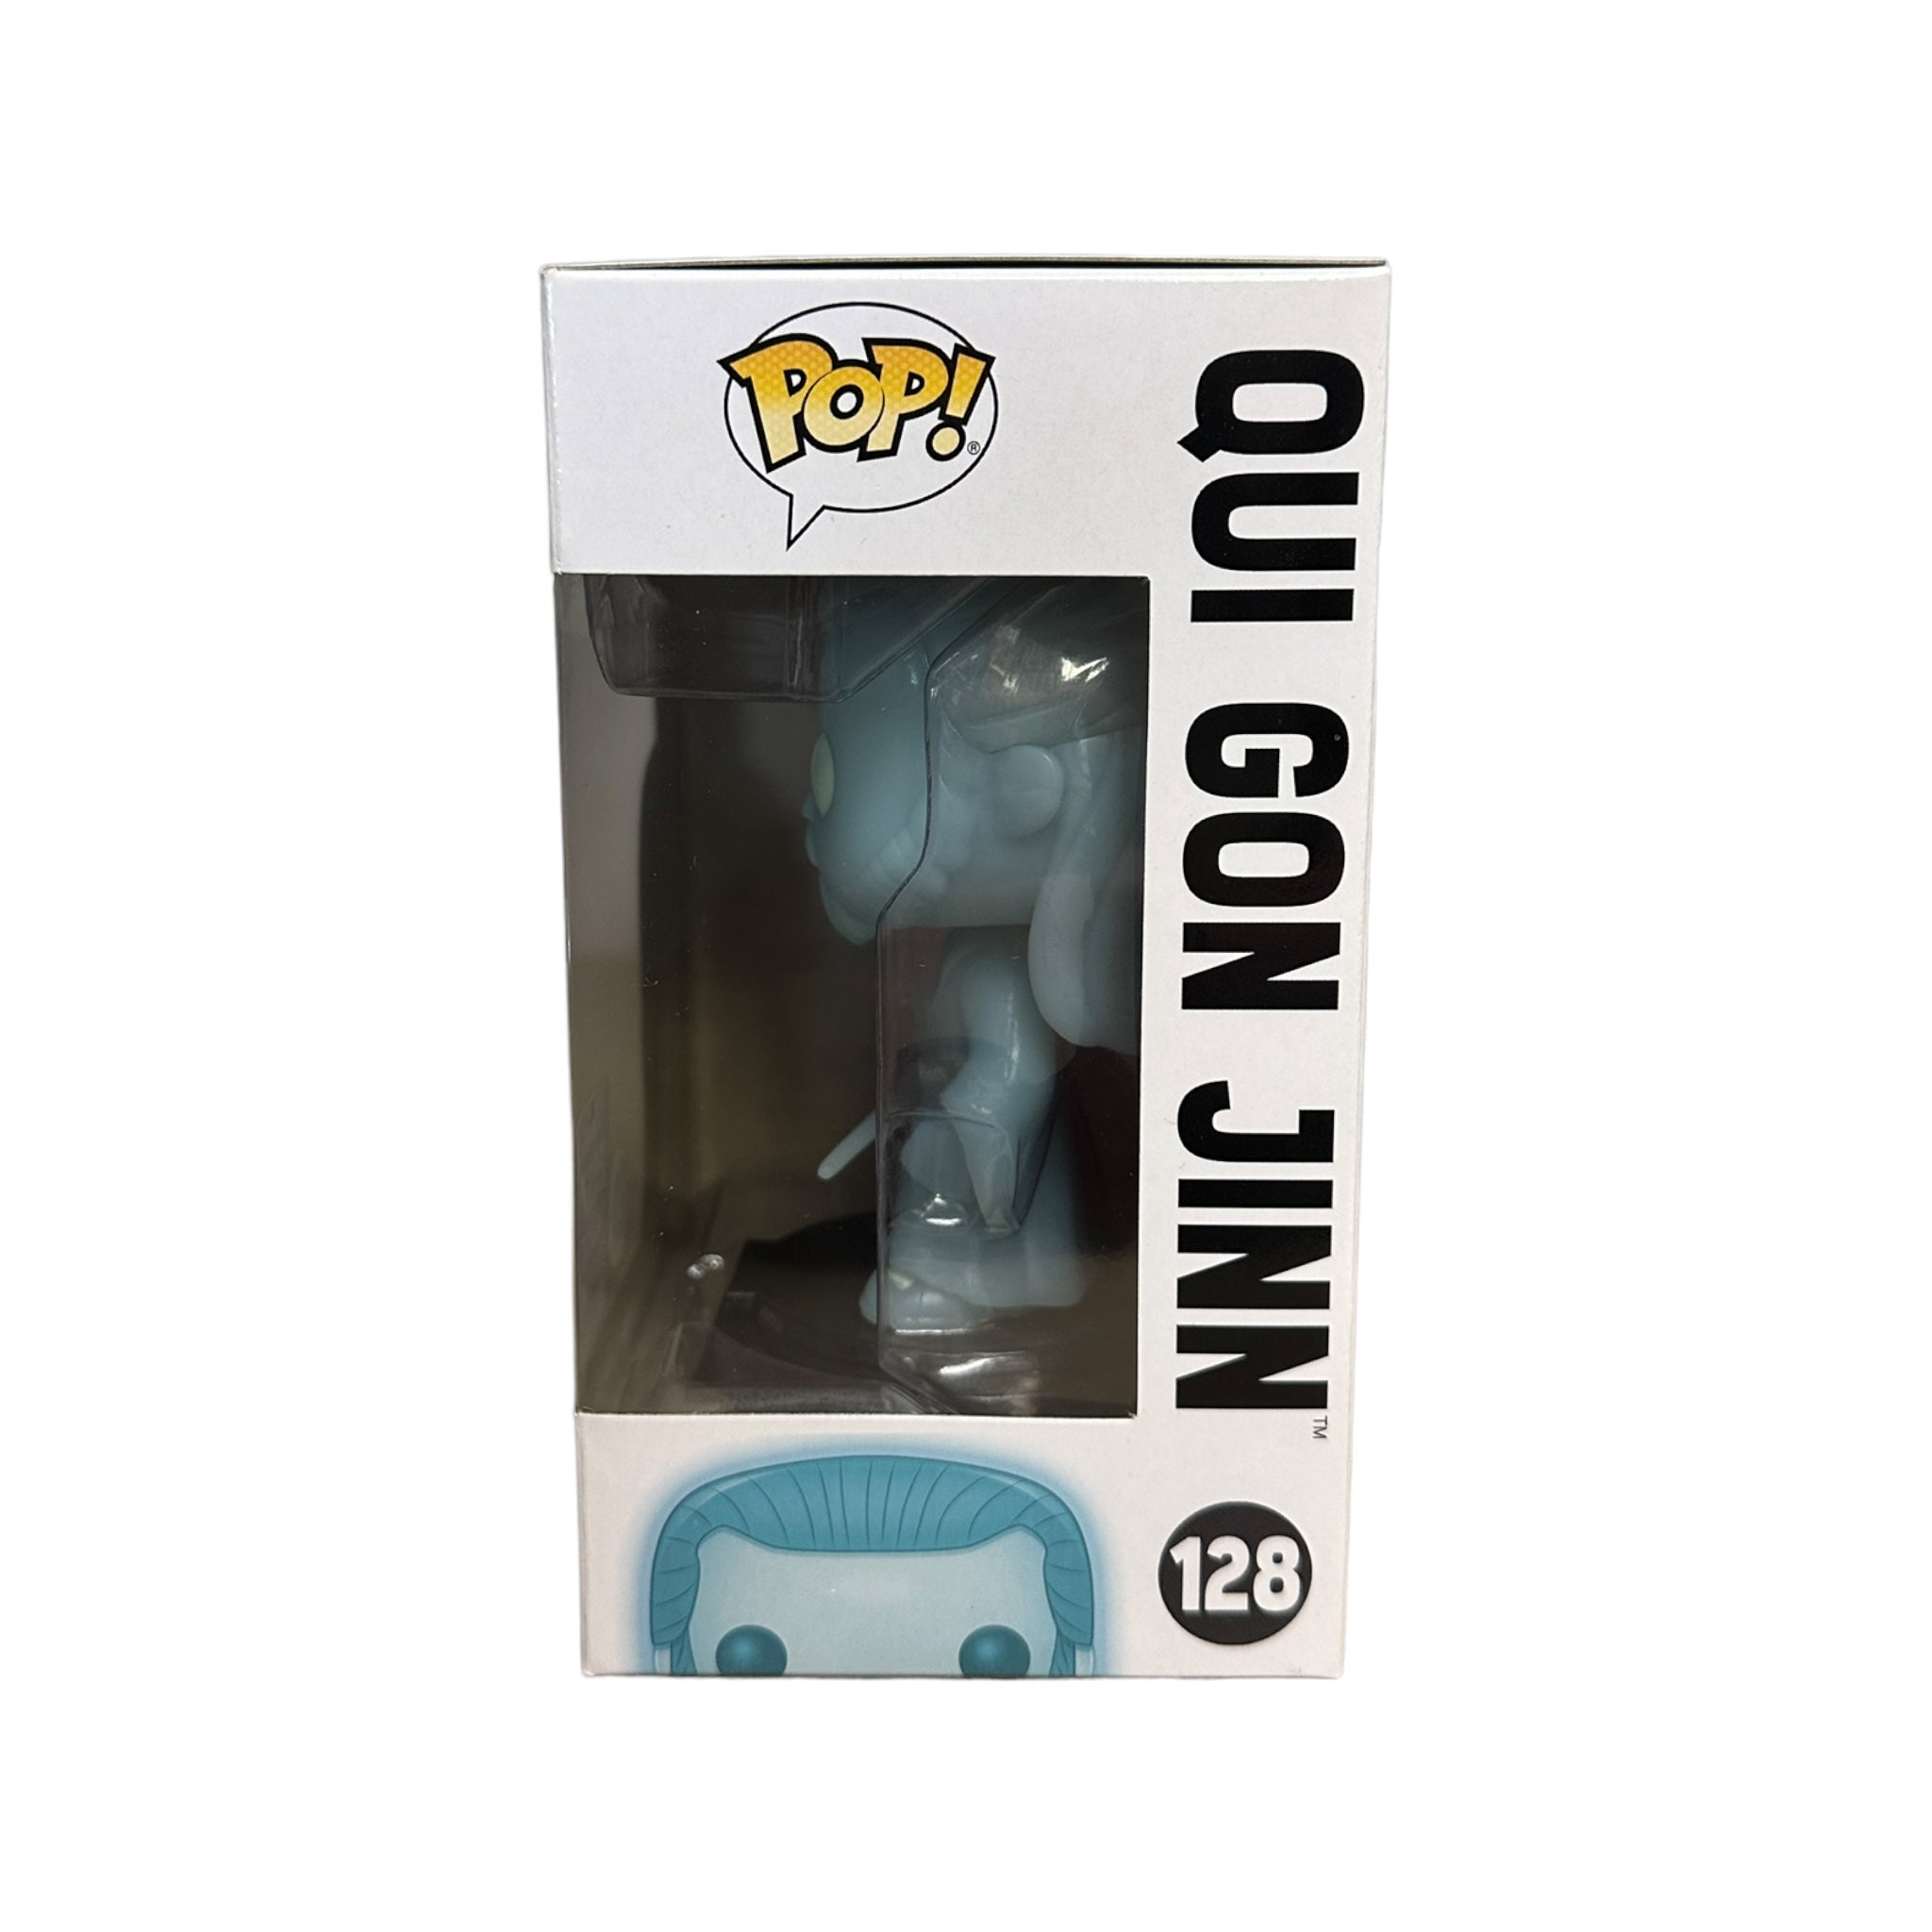 Qui Gon Jinn #128 (Holographic Glows in the Dark) Funko Pop! - Star Wars - Galactic Convention 2017 Exclusive - Condition 8.75/10